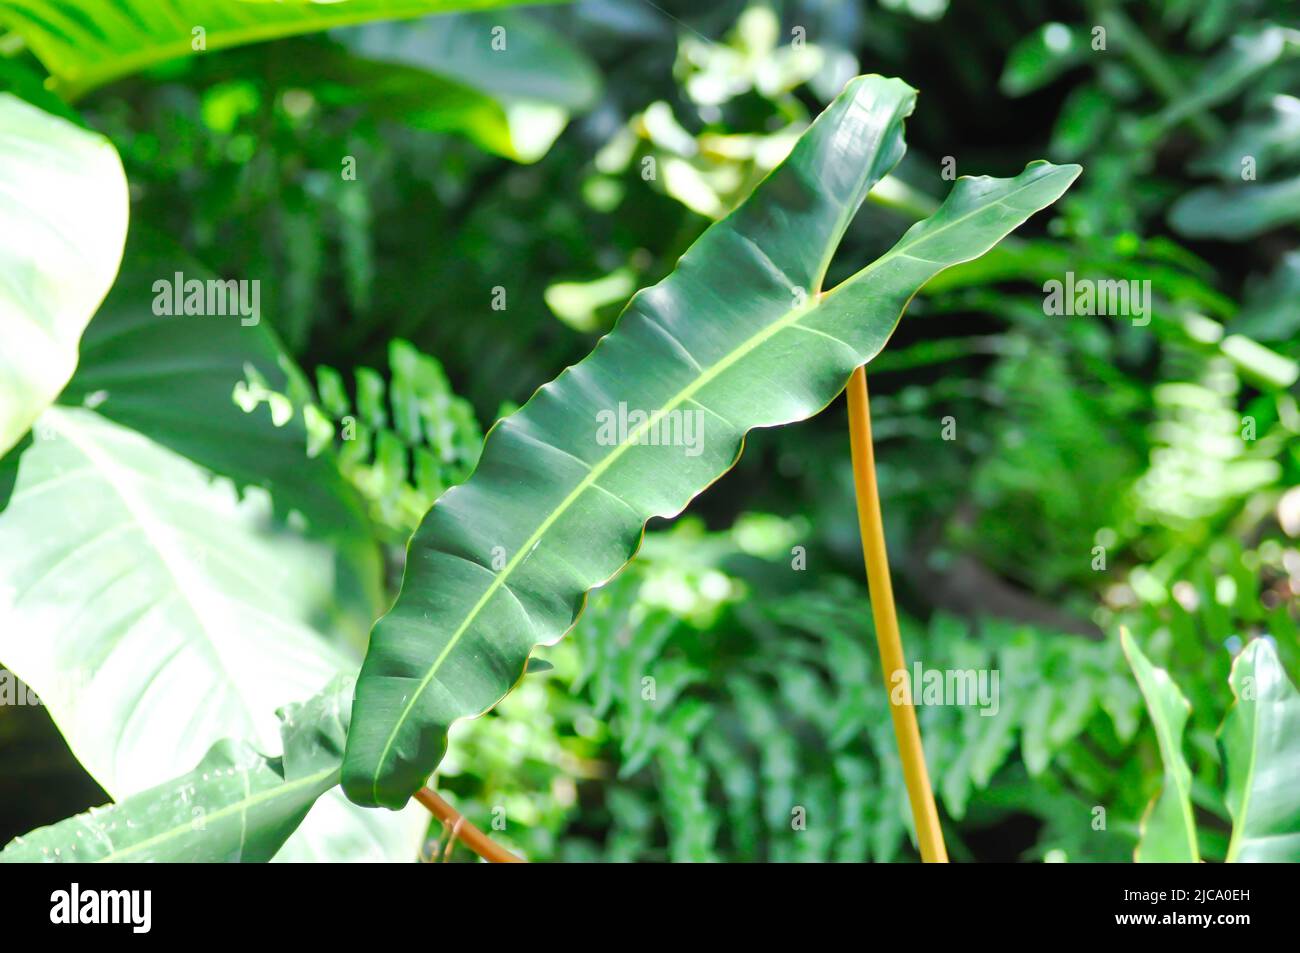 Philodendron billietiae Croat, Philodendron plant in the flower pot Stock Photo